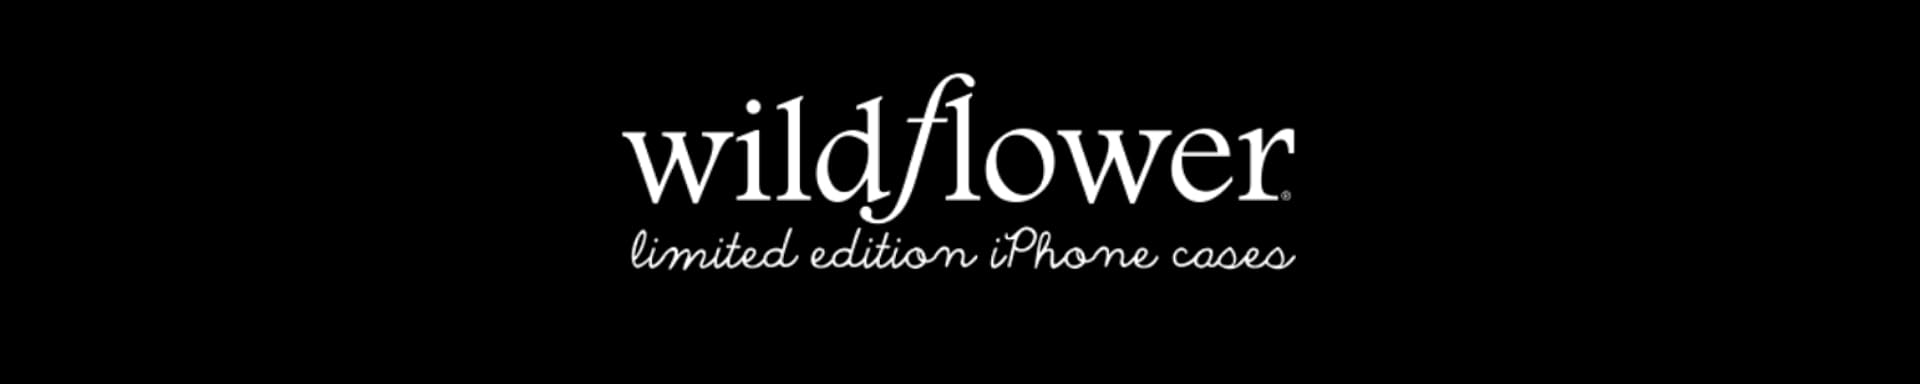 WILDFLOWER CASES - 15% Off with wildflowercases Email Sign Up